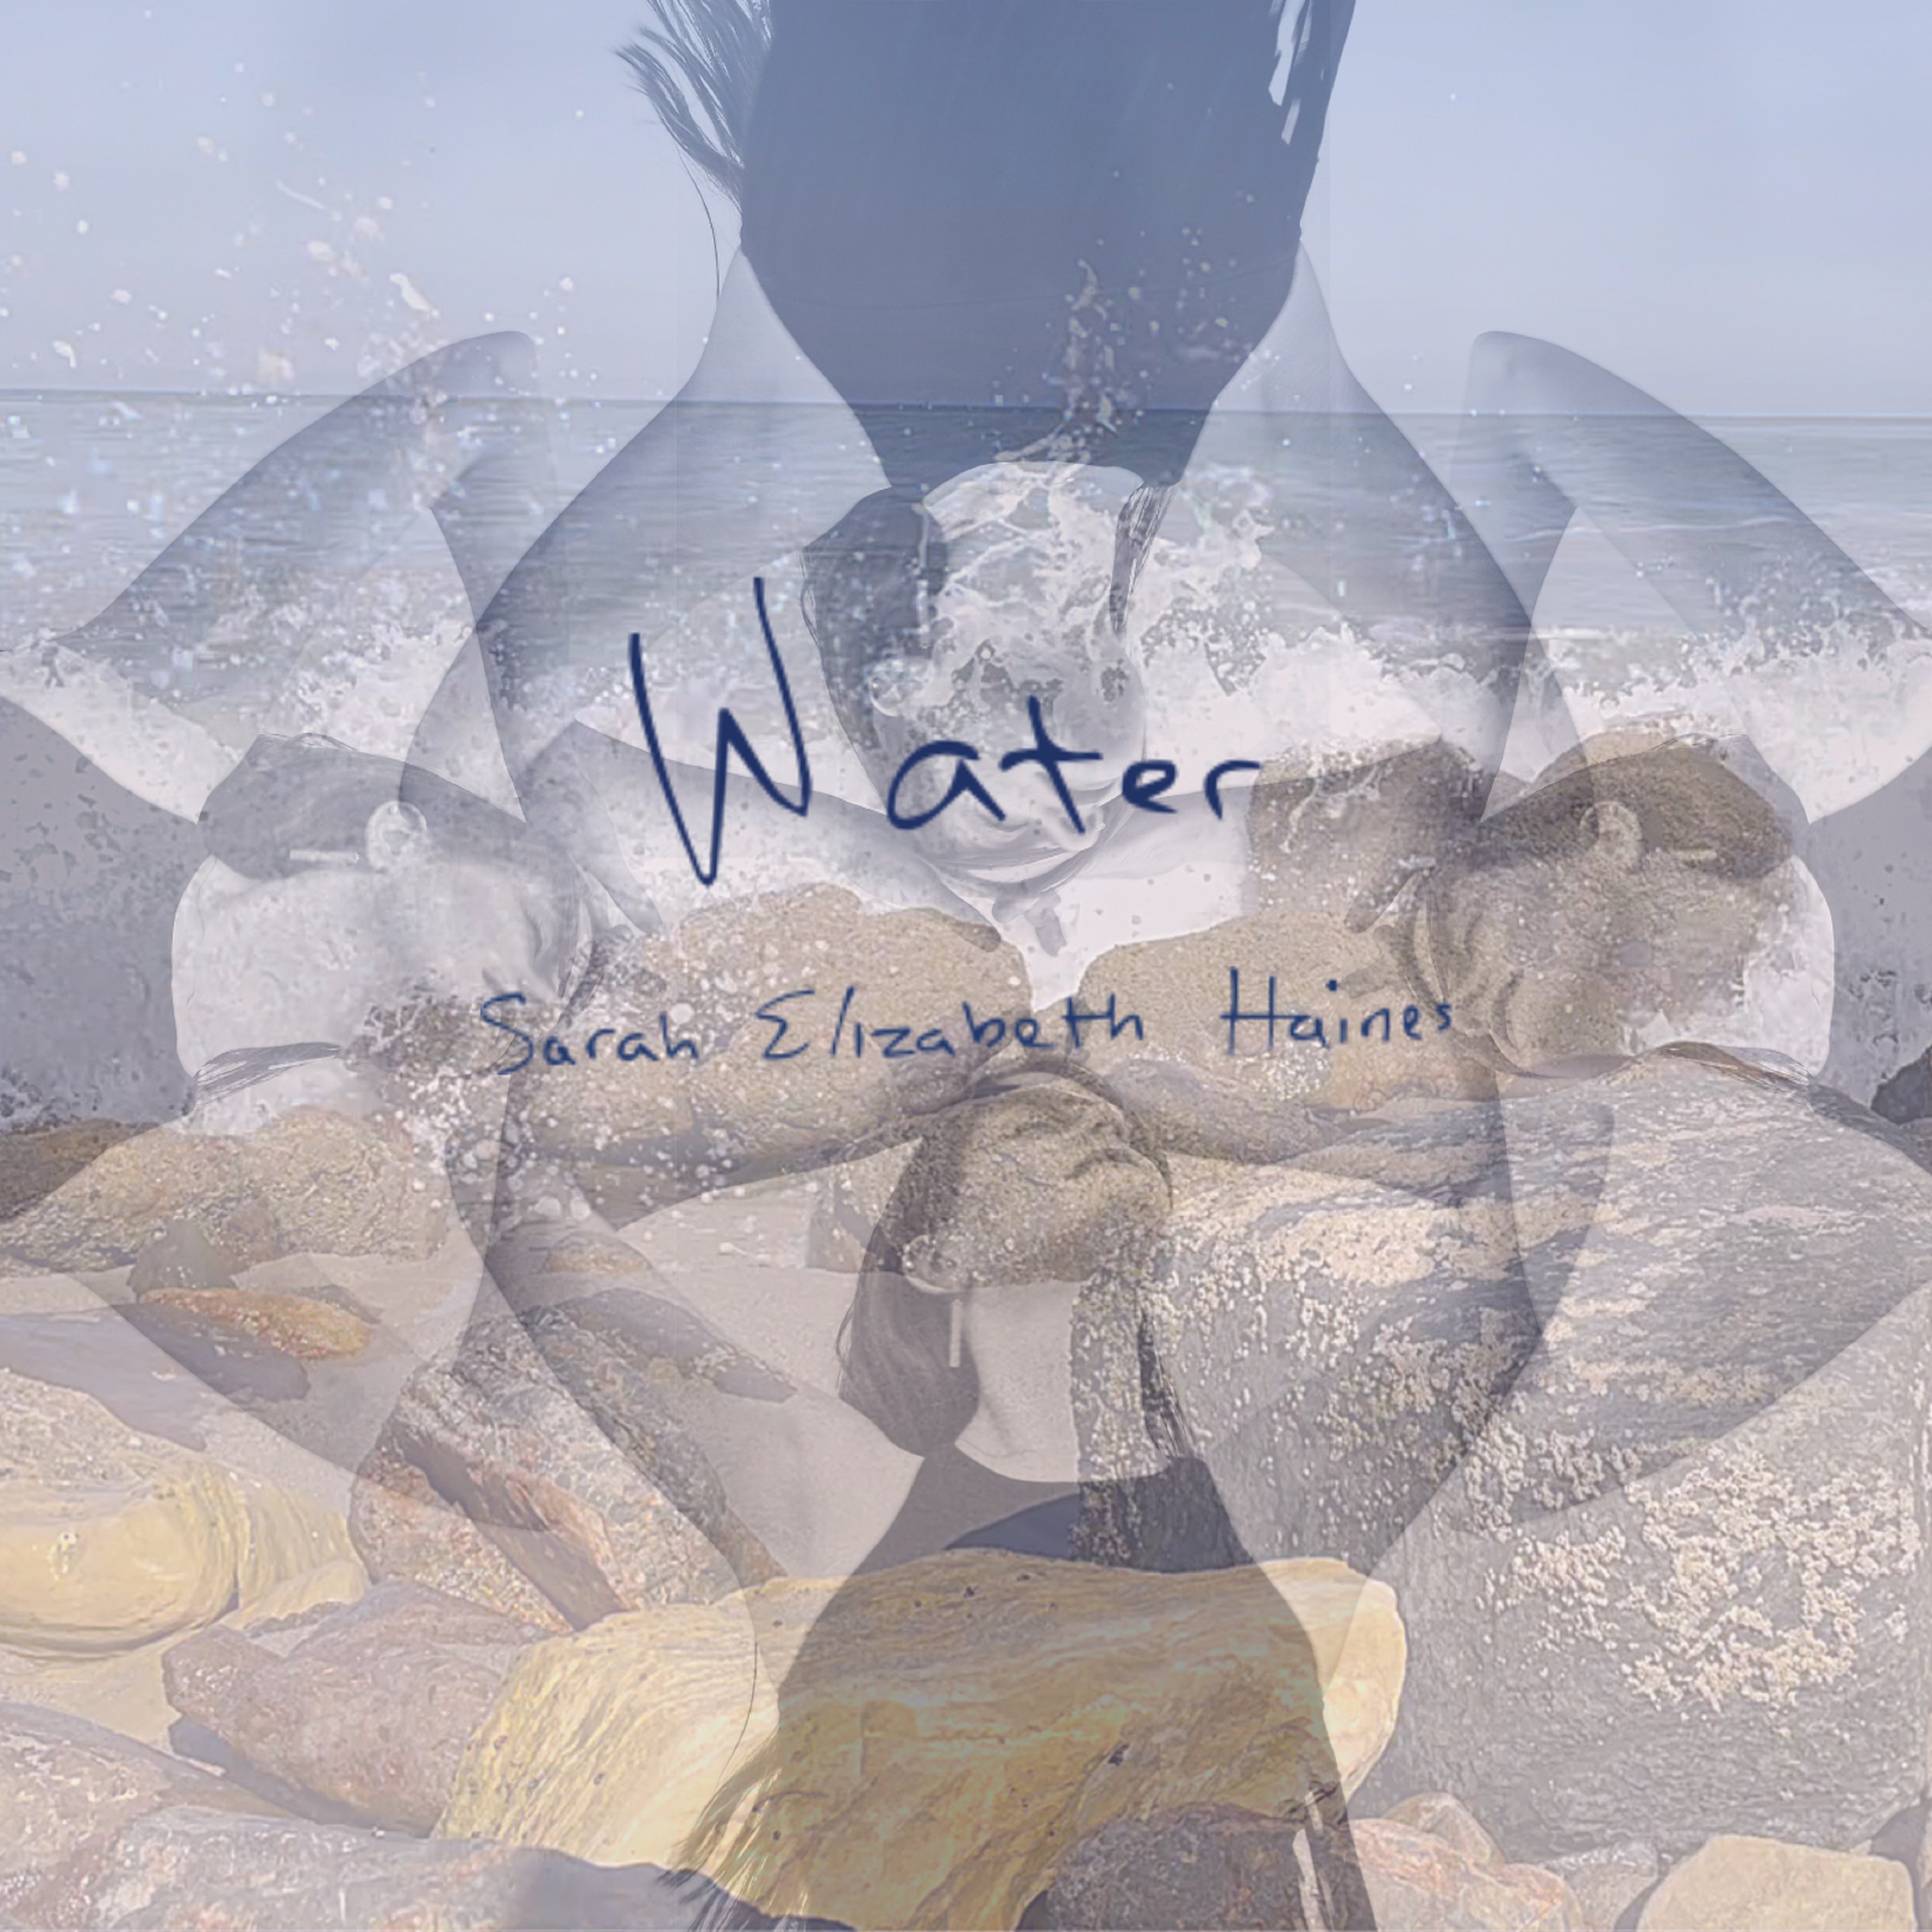 Sarah Elizabeth Haines' Ethereal "Water" is Out Now